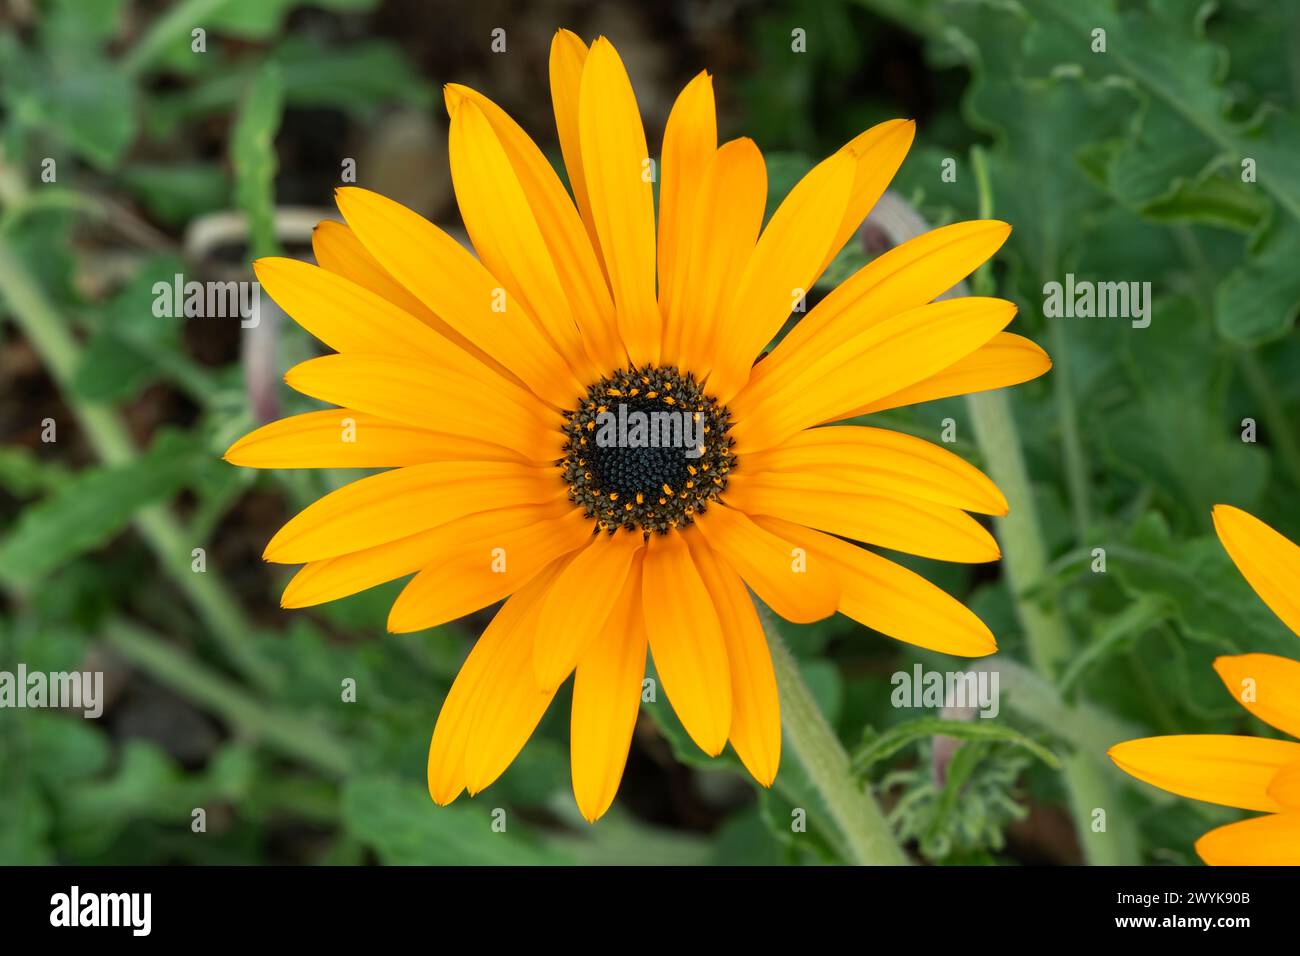 Arctotis adpressa South Africa flower plant commonly known as African Daisy, stock photo image Stock Photo